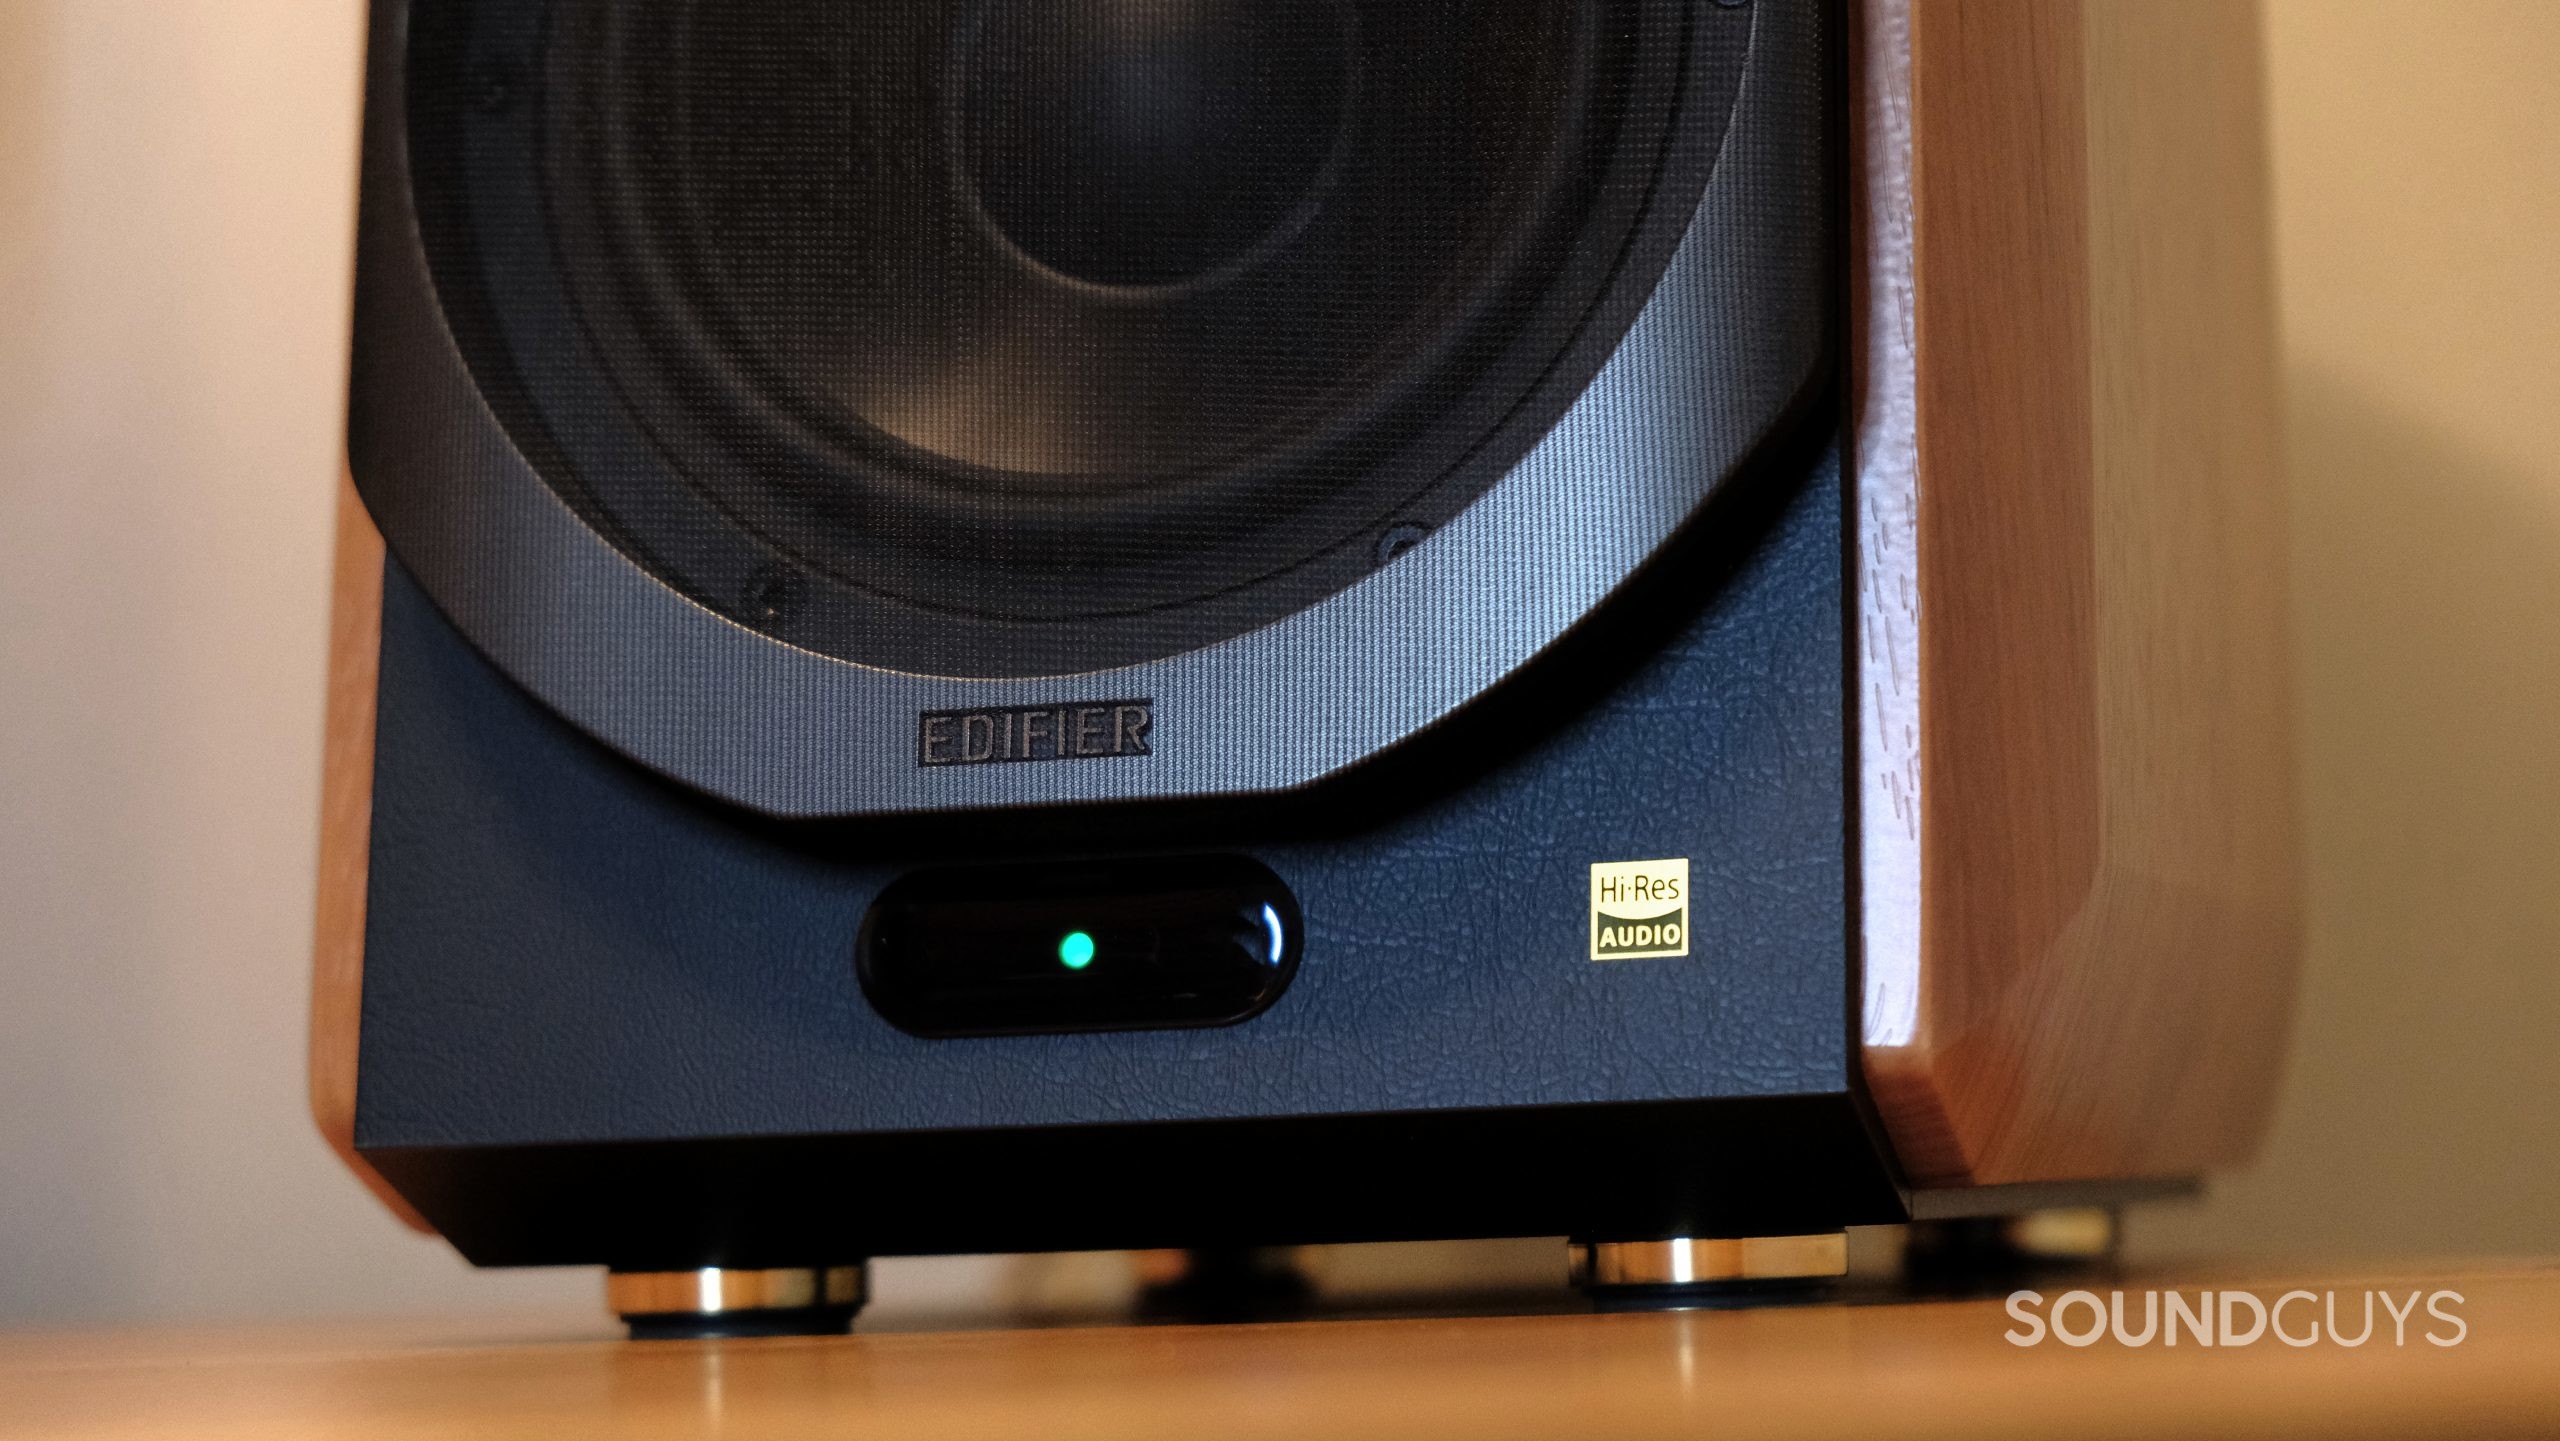 A close up of the Edifier S1000W showing a green light.